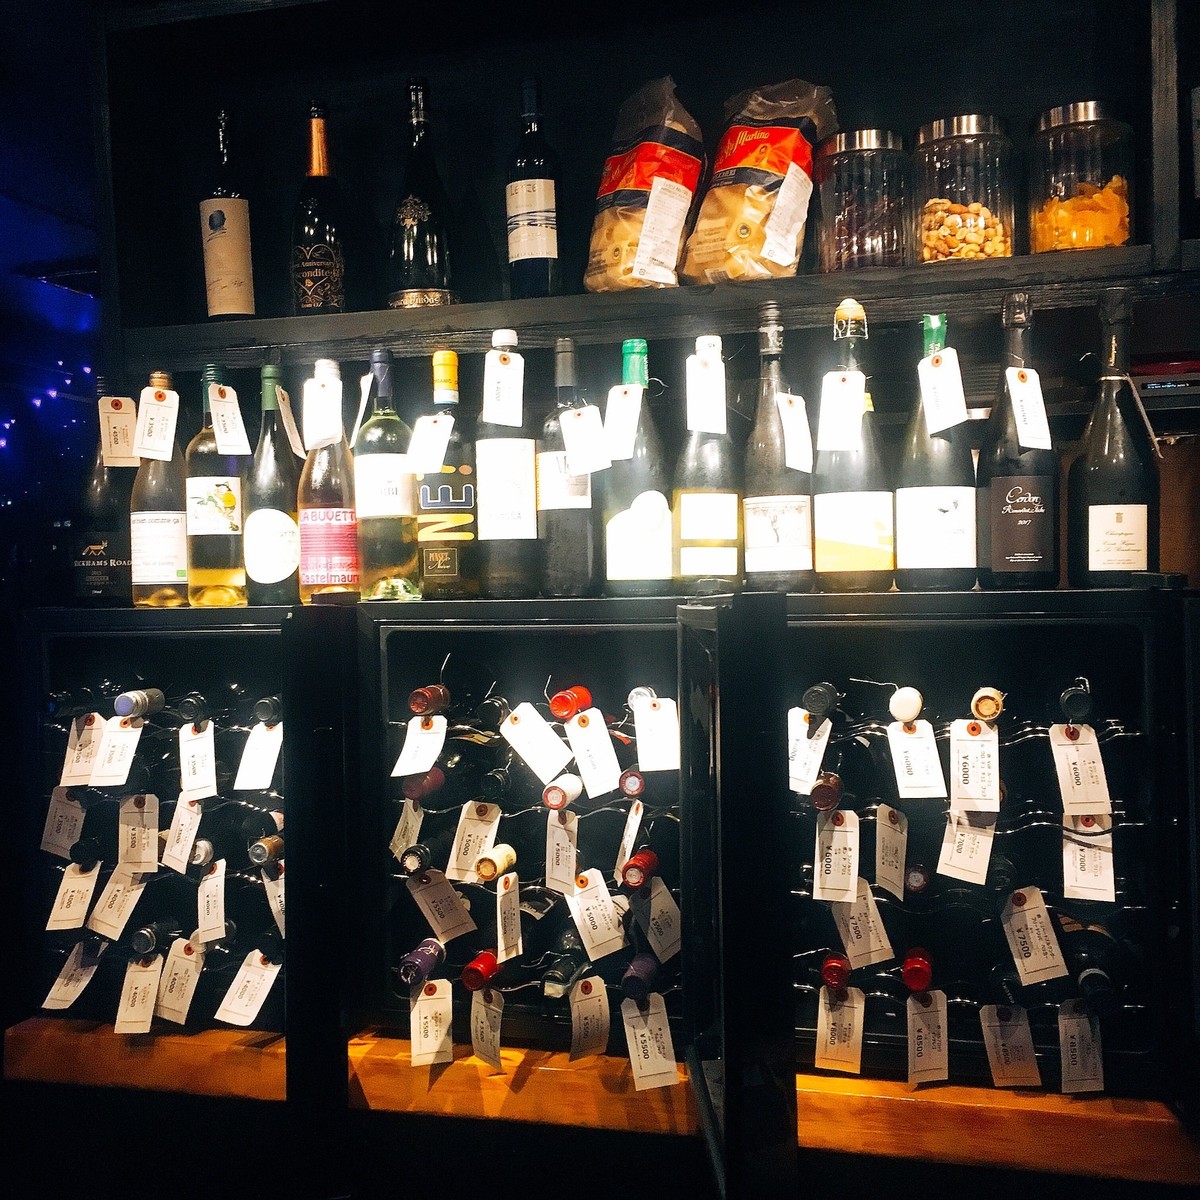 Over 70 kinds of wine cellar in the center of the store